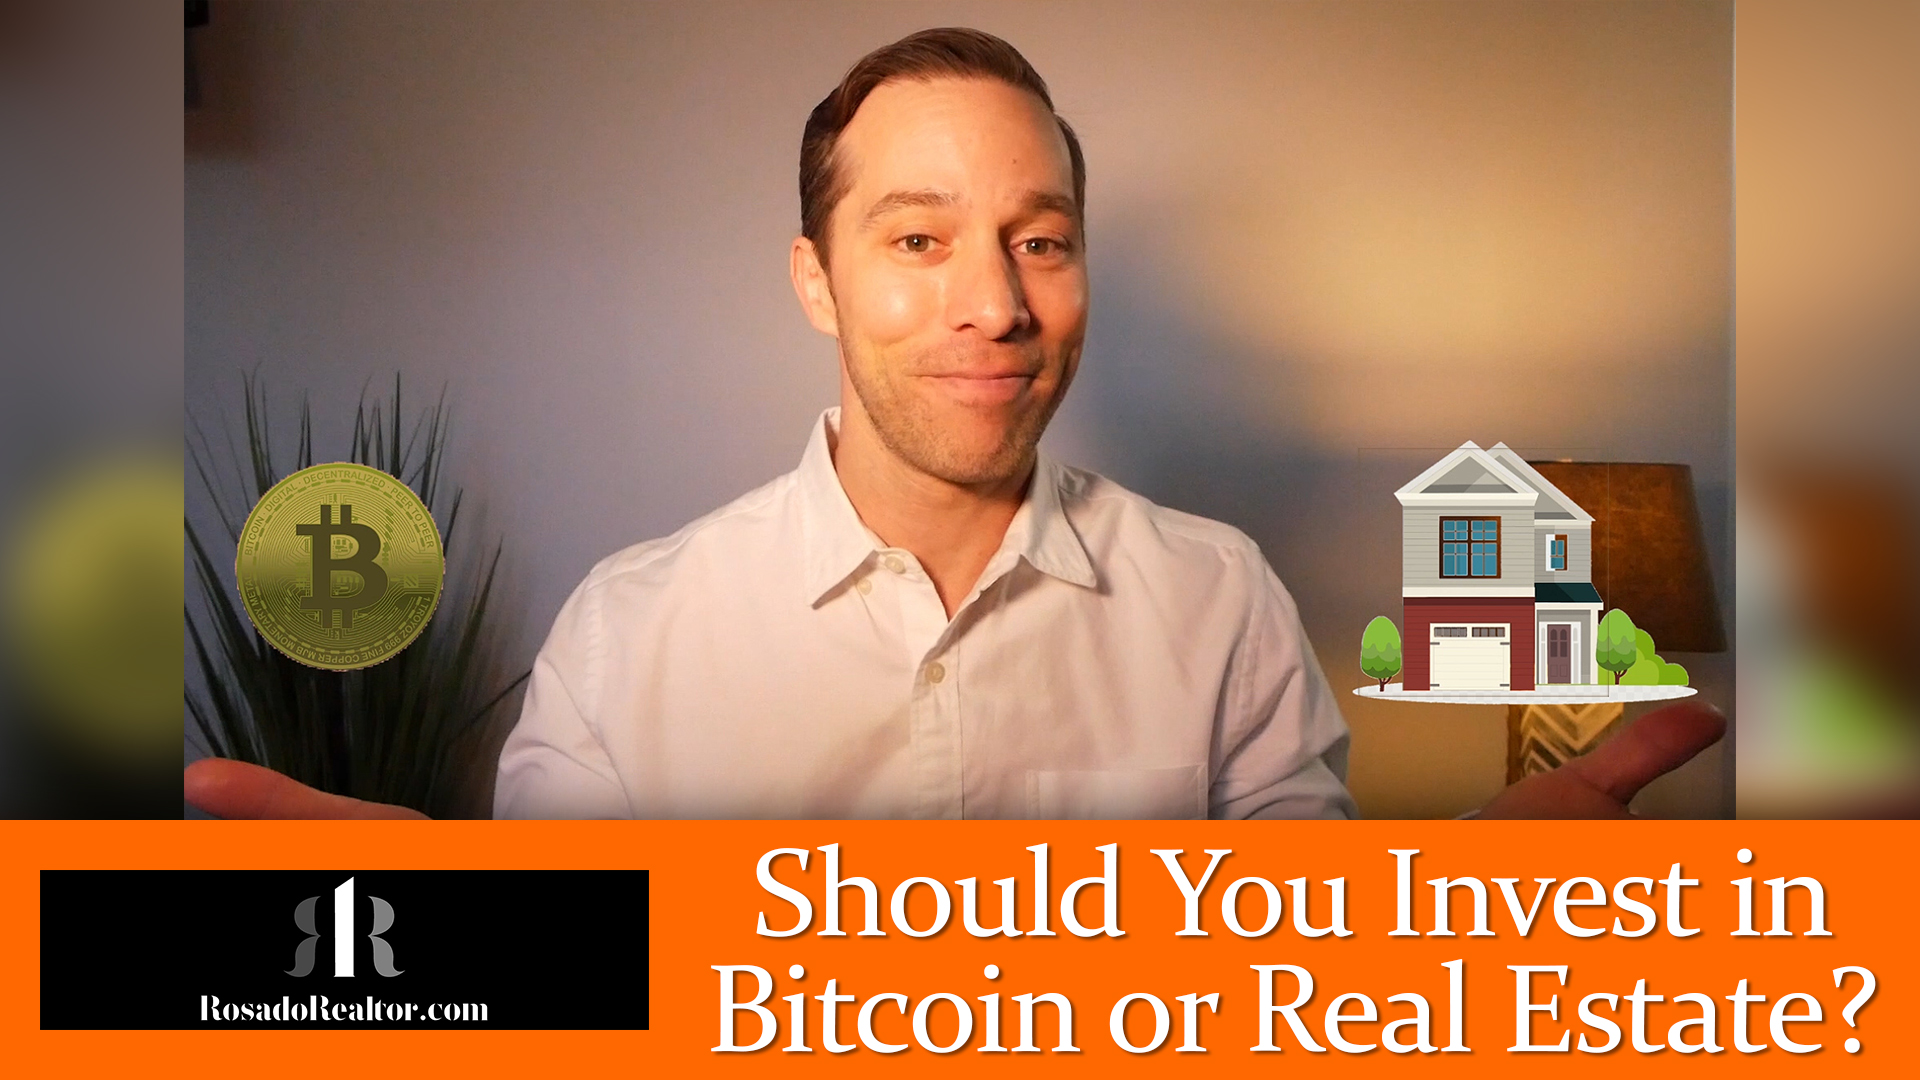 Comparing Bitcoin to Real Estate as an Investment